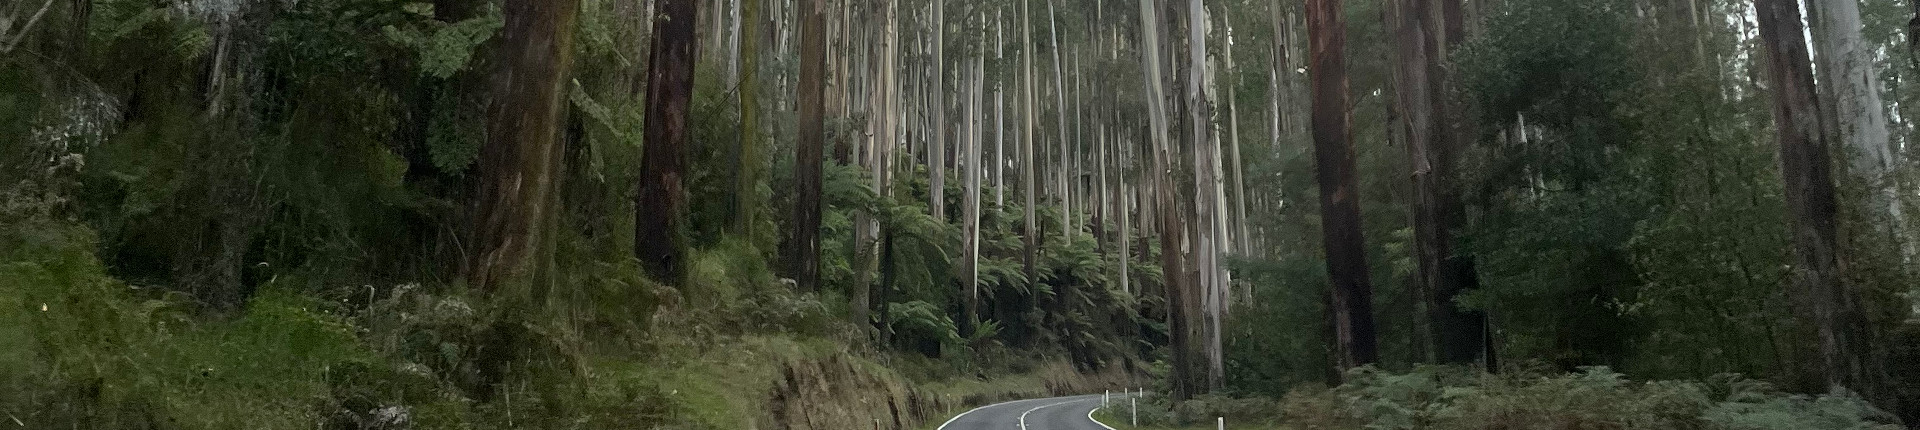 Forest road near the Yarra Ranges in Victoria Australia.